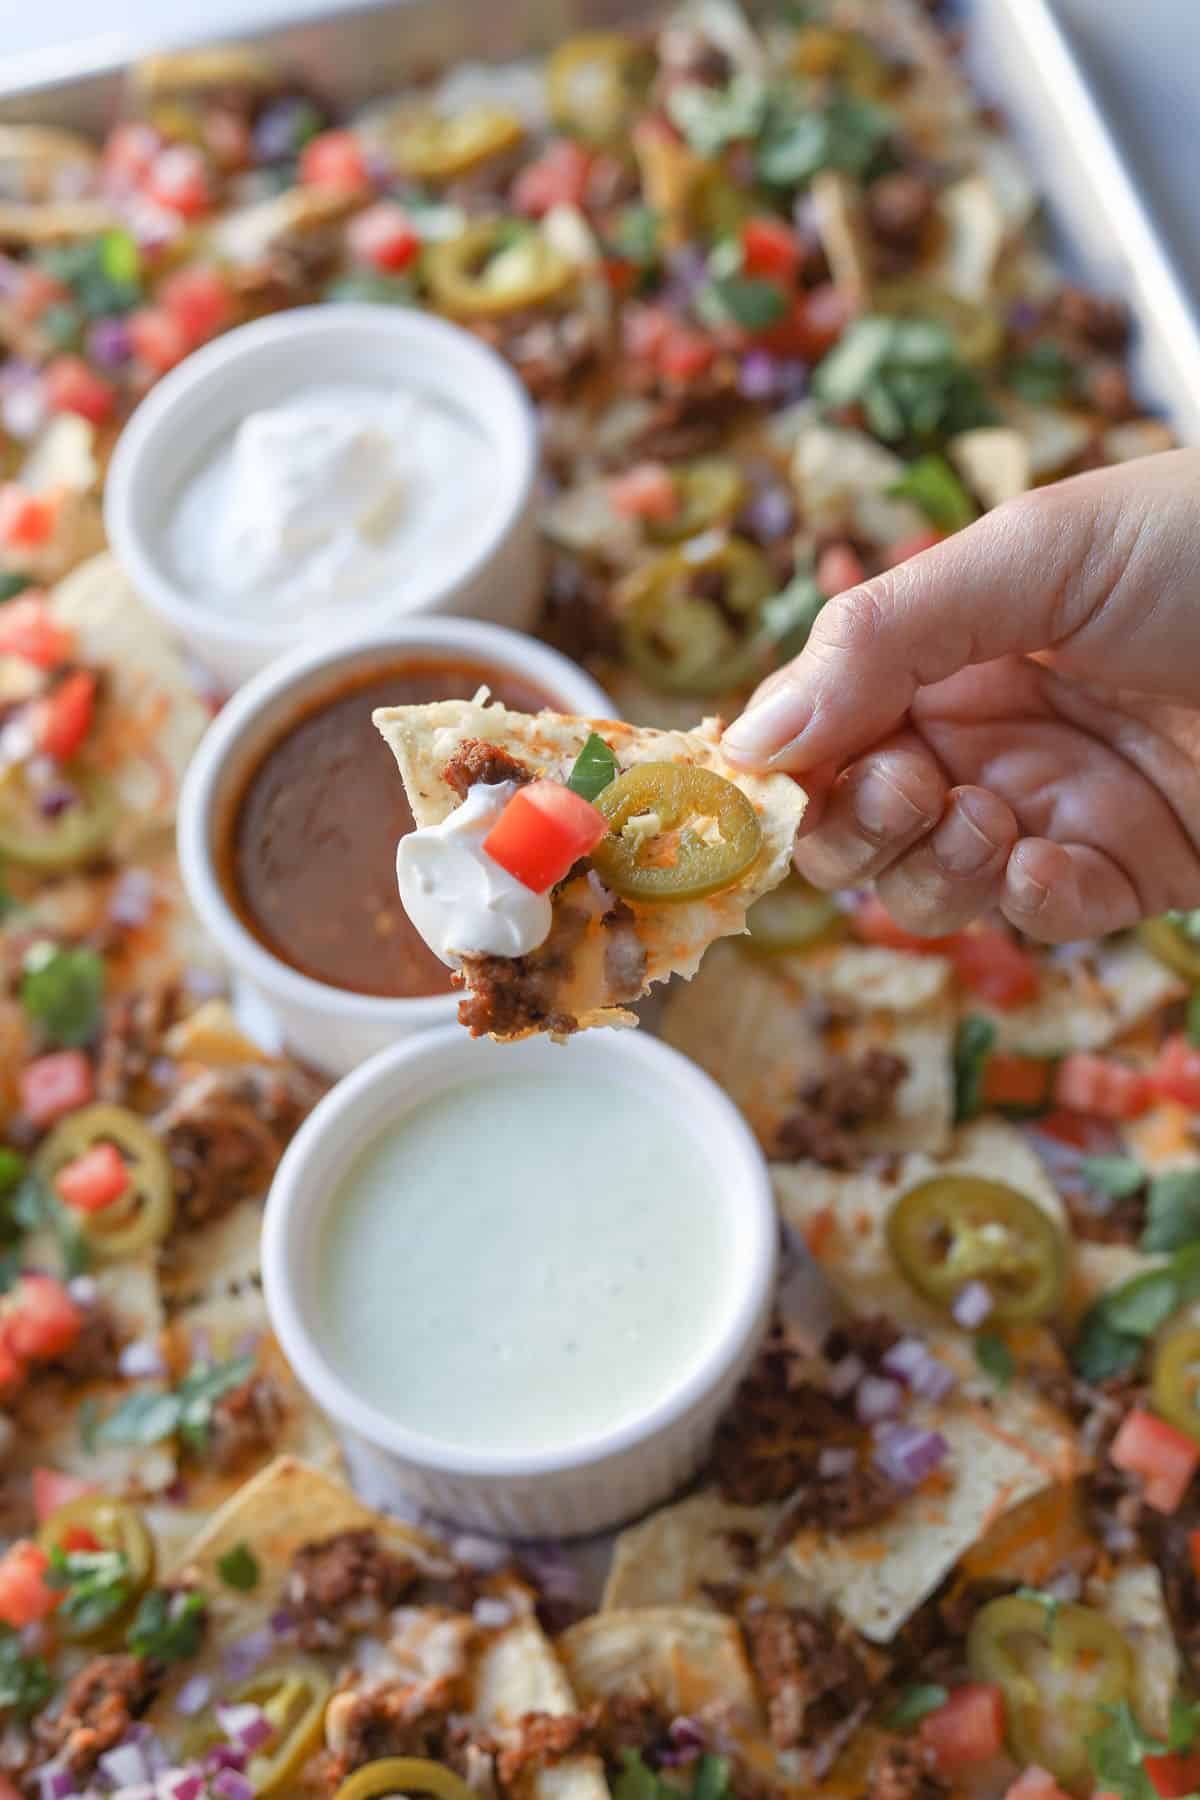 Hand holding nacho chip with toppings.